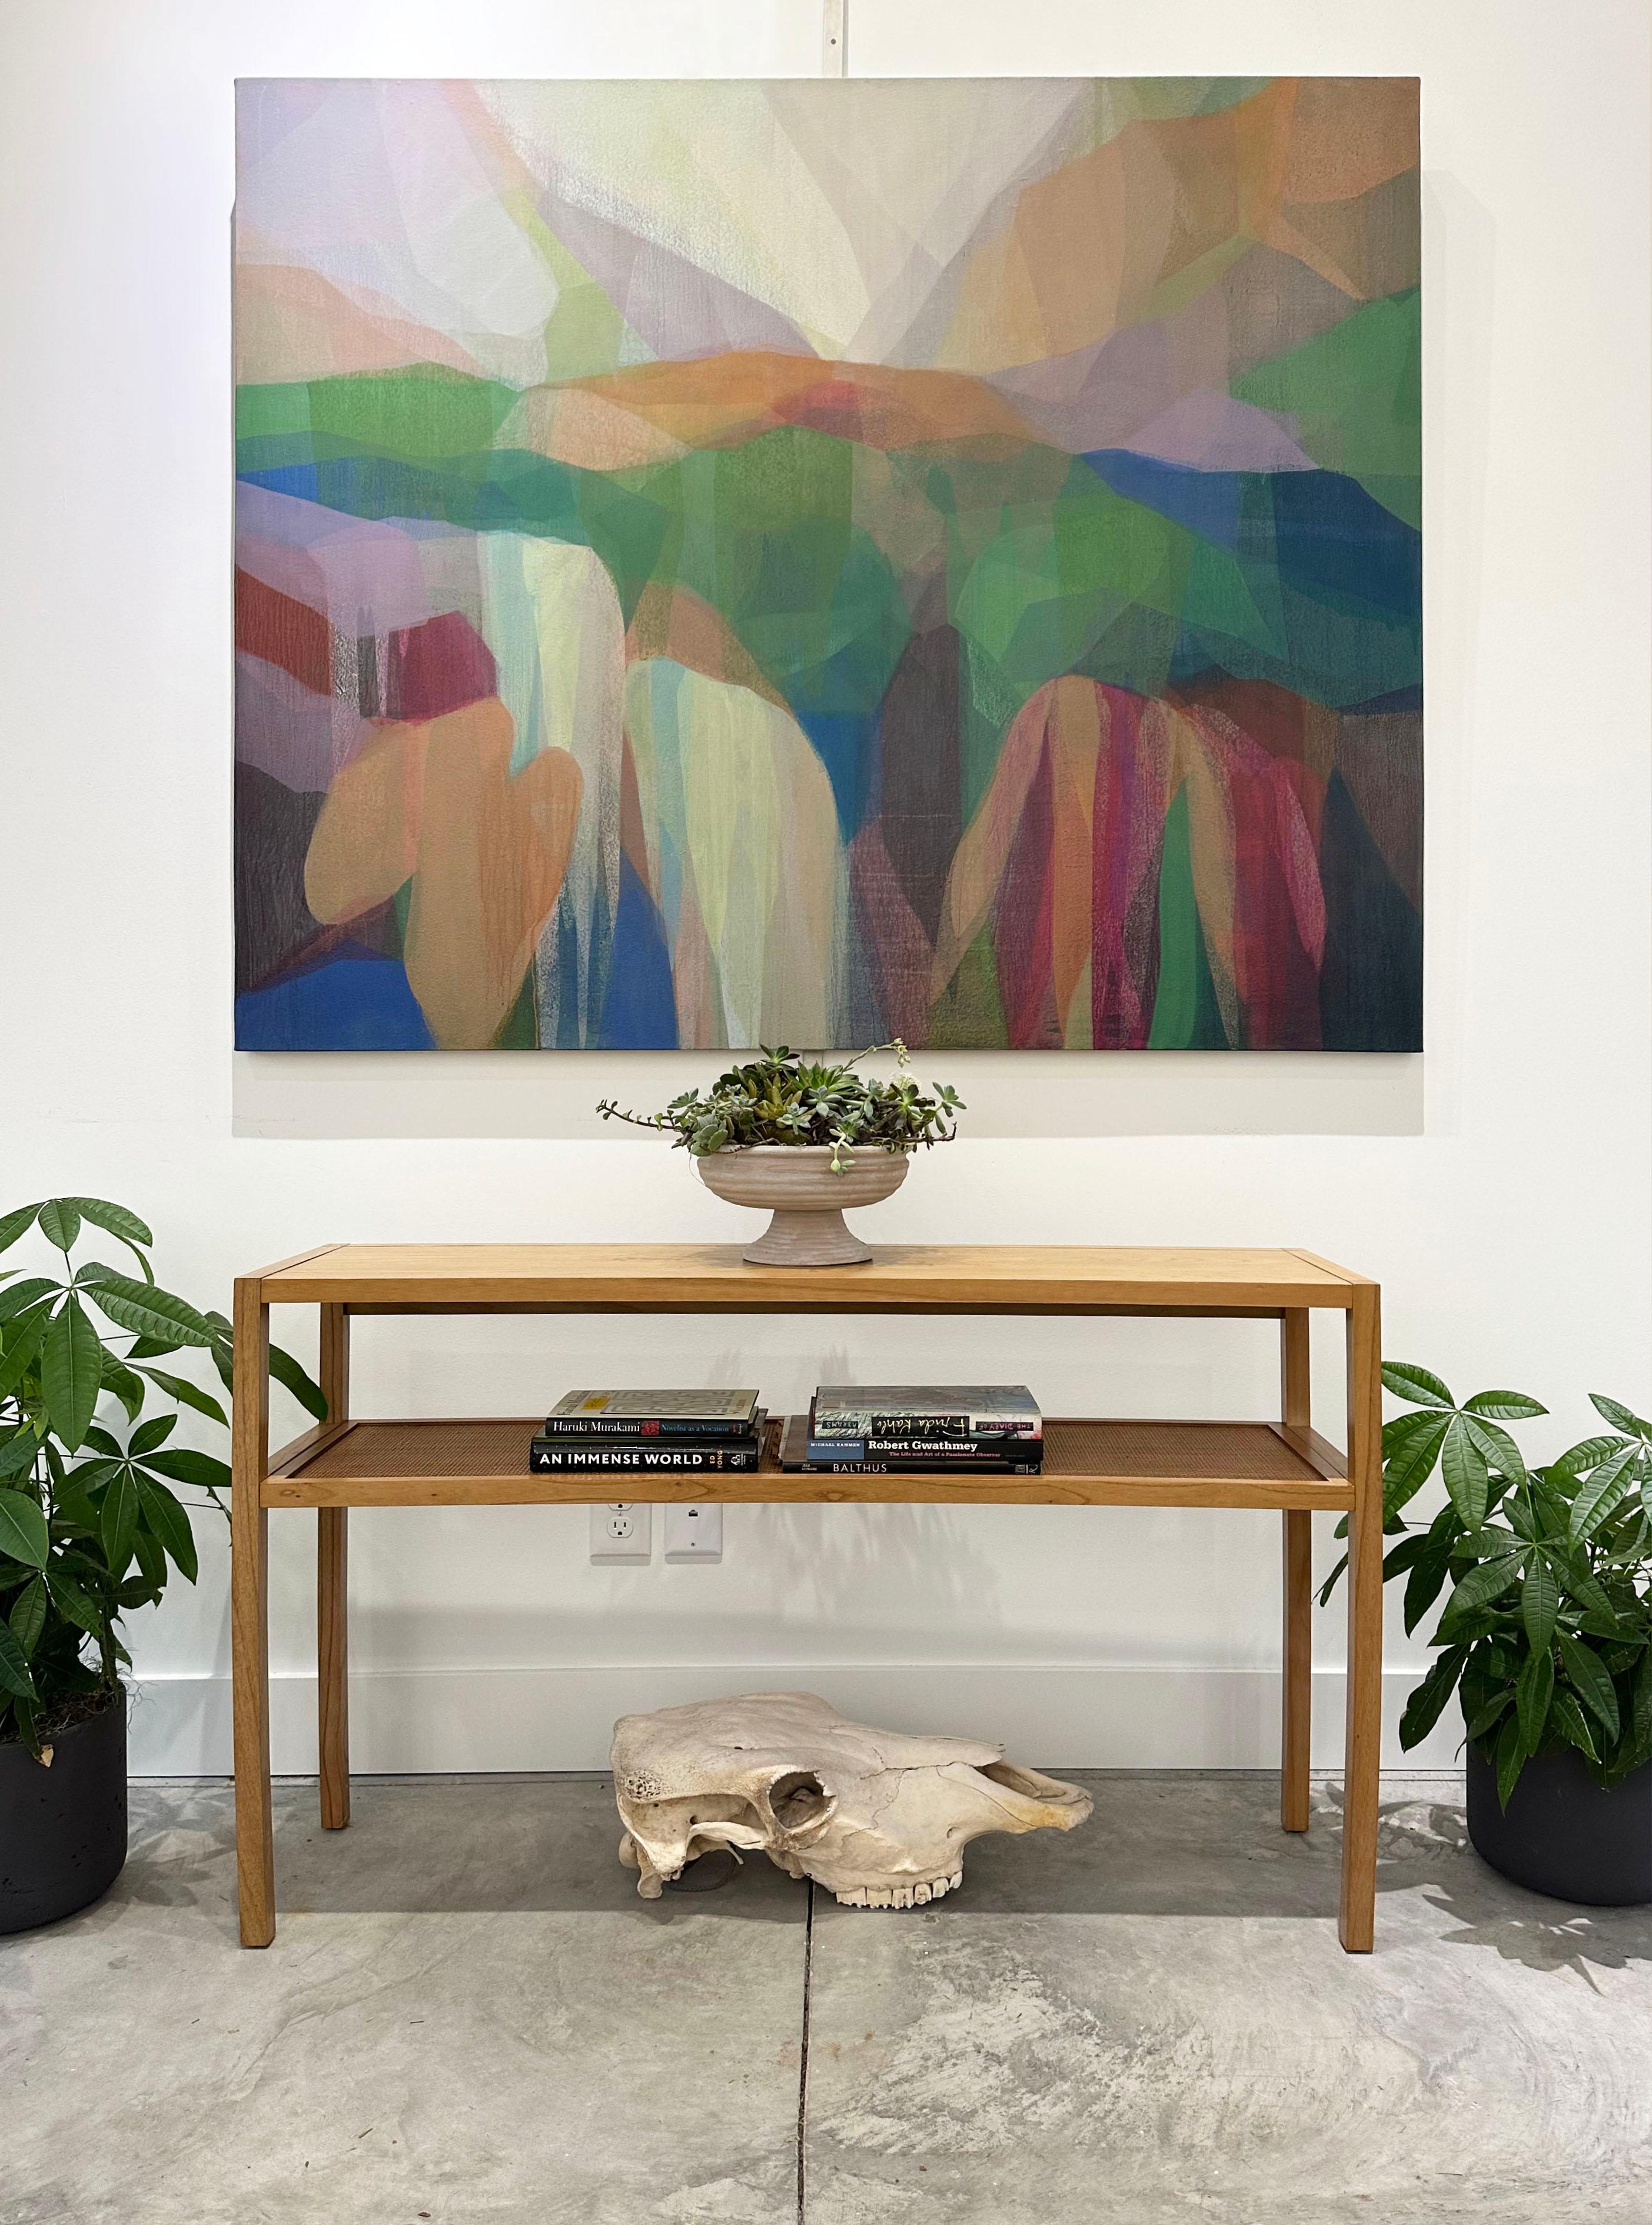 This painting is a large-scale abstract landscape on canvas featuring vibrant and dark layers of green, yellow, orange and blue.

Katherine Sandoz is inspired by the work of Helen Frankenthaler, Richard Diebenkorn, Morris Louis, Vincent Van Gogh,